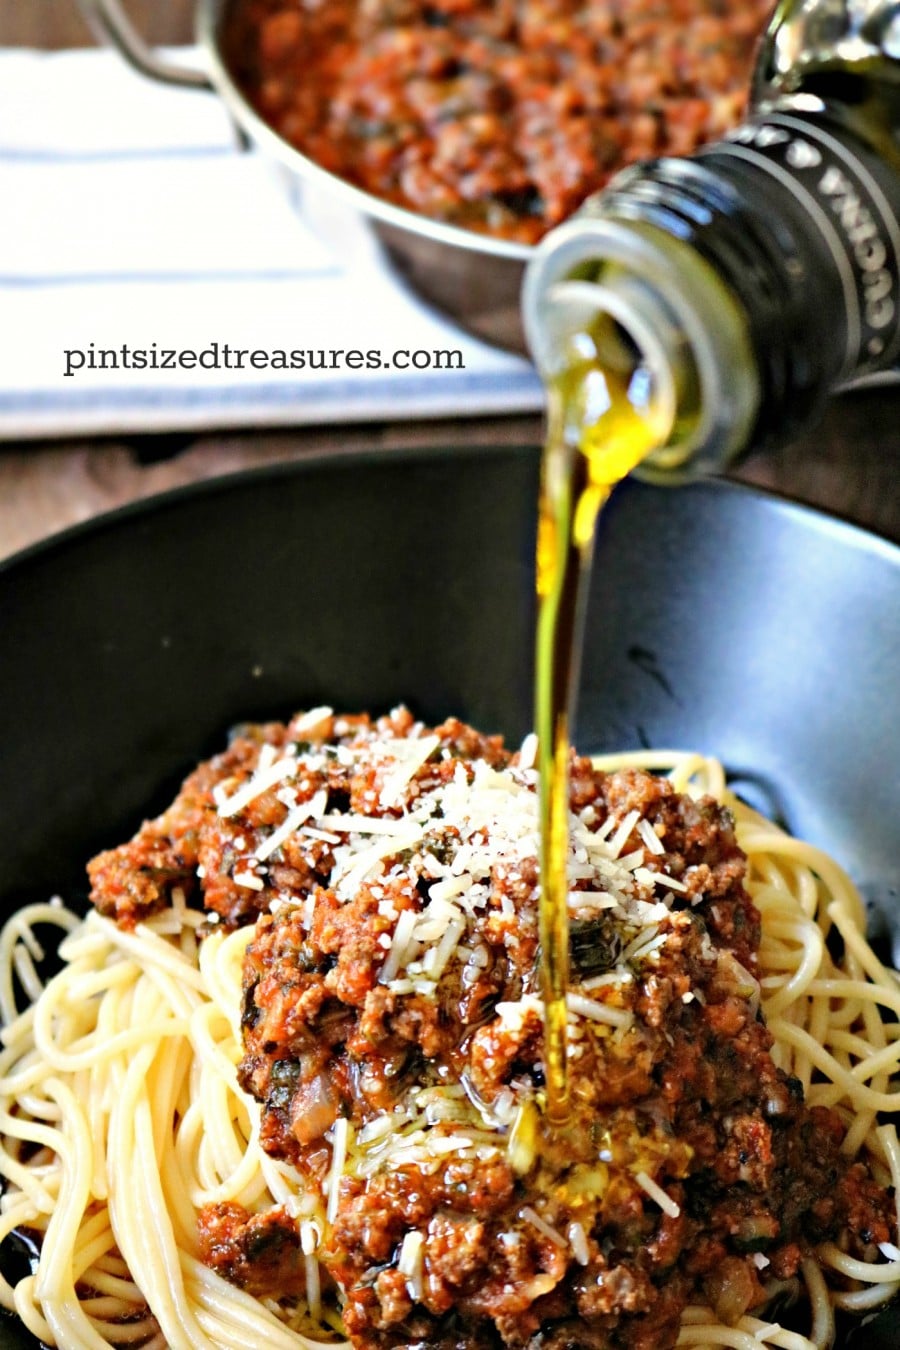 pouring olive oil into the bolognese sauce